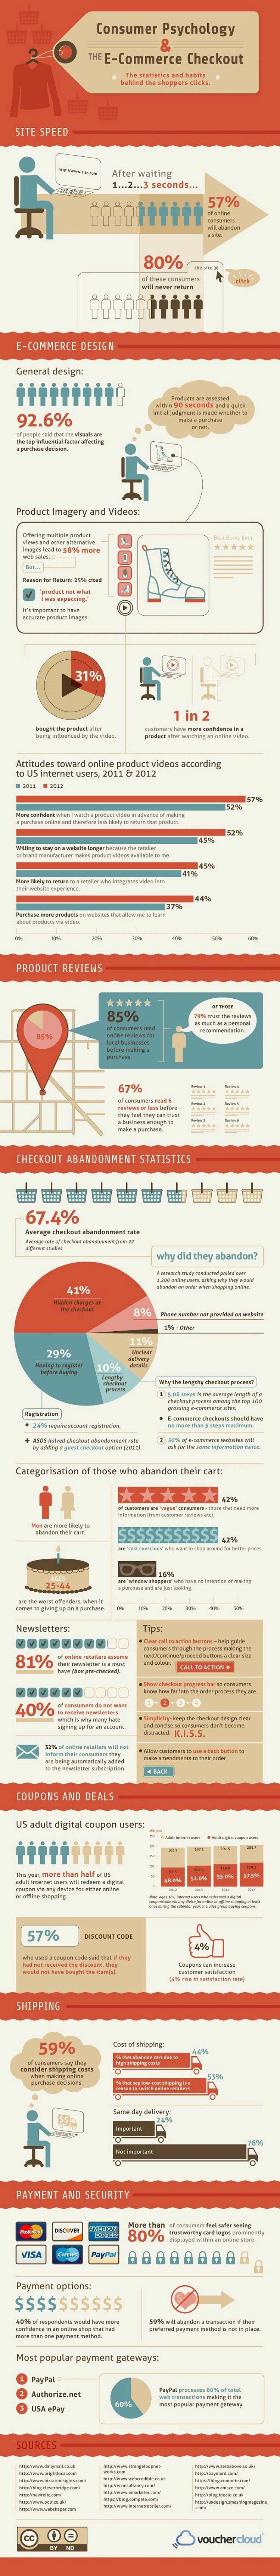 Consumer Psychology and the E-Commerce Checkout [Infographic]